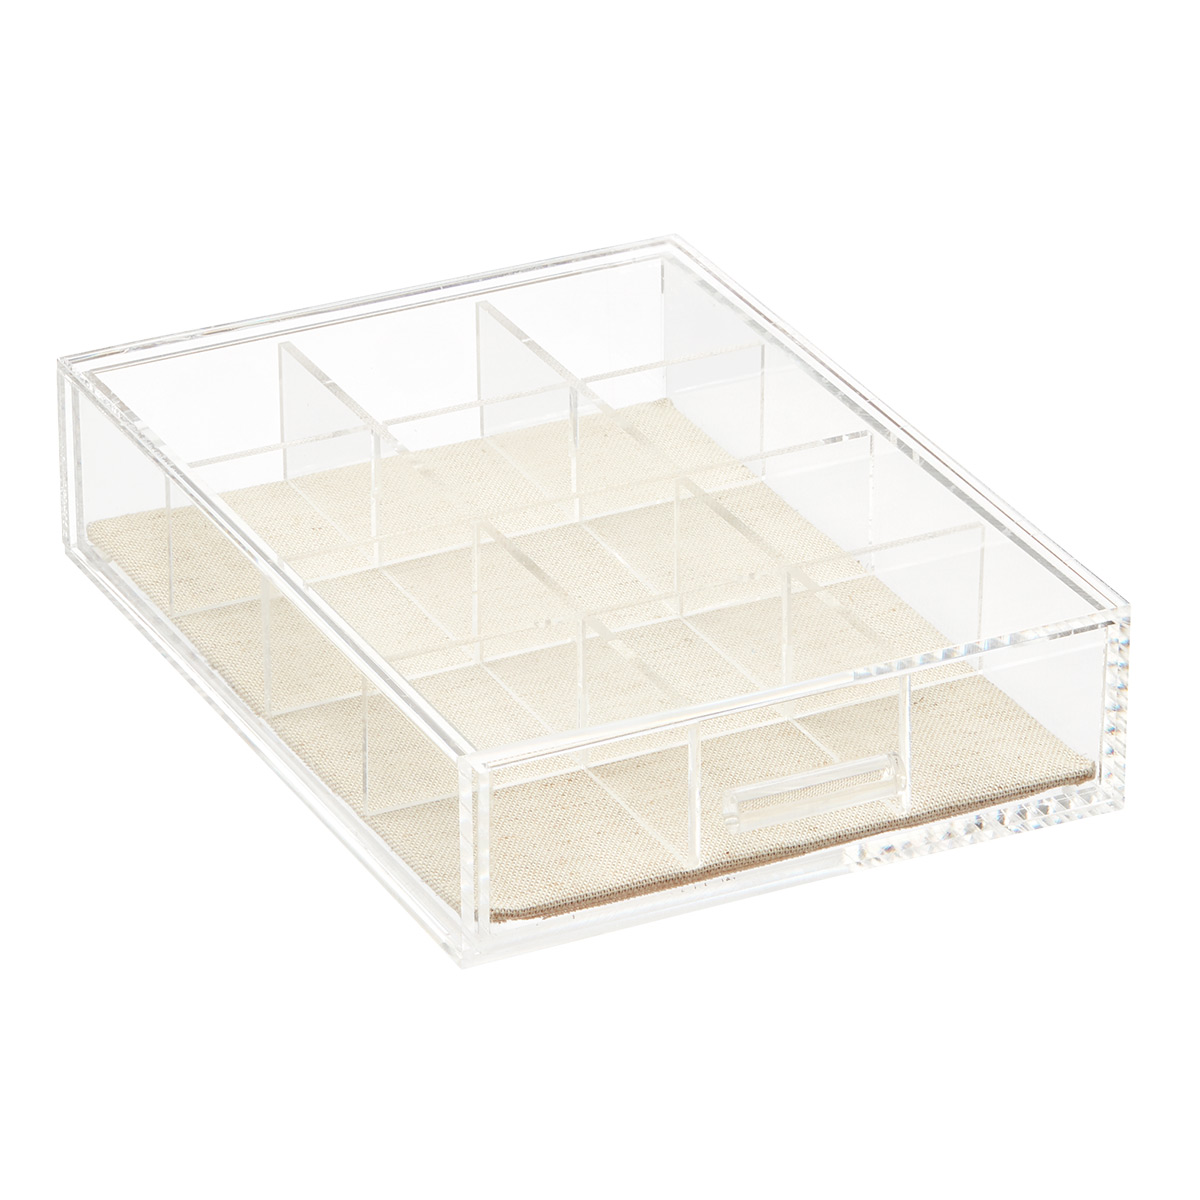 https://www.containerstore.com/catalogimages/391656/10081577-12-compartment-narrow-acryl.jpg